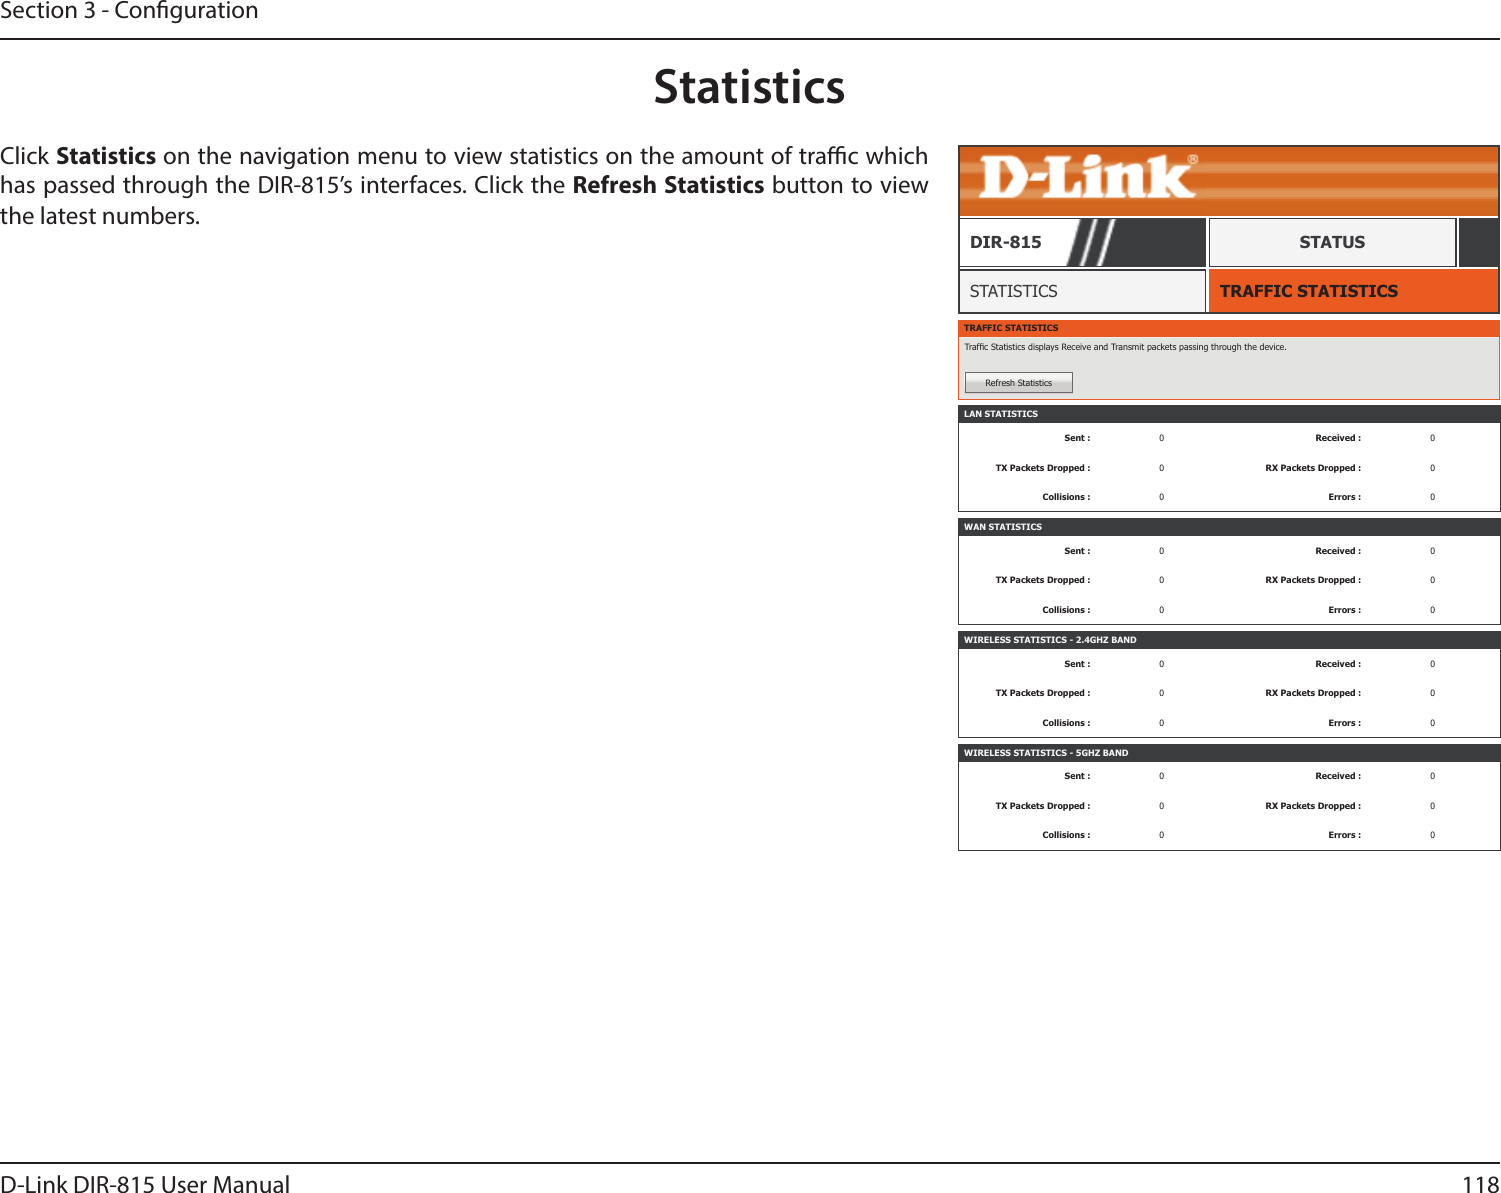 118D-Link DIR-815 User ManualSection 3 - CongurationStatisticsTRAFFIC STATISTICSSTATISTICSDIR-815 STATUSClick Statistics on the navigation menu to view statistics on the amount of trac which has passed through the DIR-815’s interfaces. Click the Refresh Statistics button to view the latest numbers. TRAFFIC STATISTICSTrafc Statistics displays Receive and Transmit packets passing through the device.Refresh StatisticsLAN STATISTICSSent : 0Received : 0TX Packets Dropped : 0RX Packets Dropped : 0Collisions : 0Errors : 0WAN STATISTICSSent : 0Received : 0TX Packets Dropped : 0RX Packets Dropped : 0Collisions : 0Errors : 0WIRELESS STATISTICS - 2.4GHZ BANDSent : 0Received : 0TX Packets Dropped : 0RX Packets Dropped : 0Collisions : 0Errors : 0WIRELESS STATISTICS - 5GHZ BANDSent : 0Received : 0TX Packets Dropped : 0RX Packets Dropped : 0Collisions : 0Errors : 0